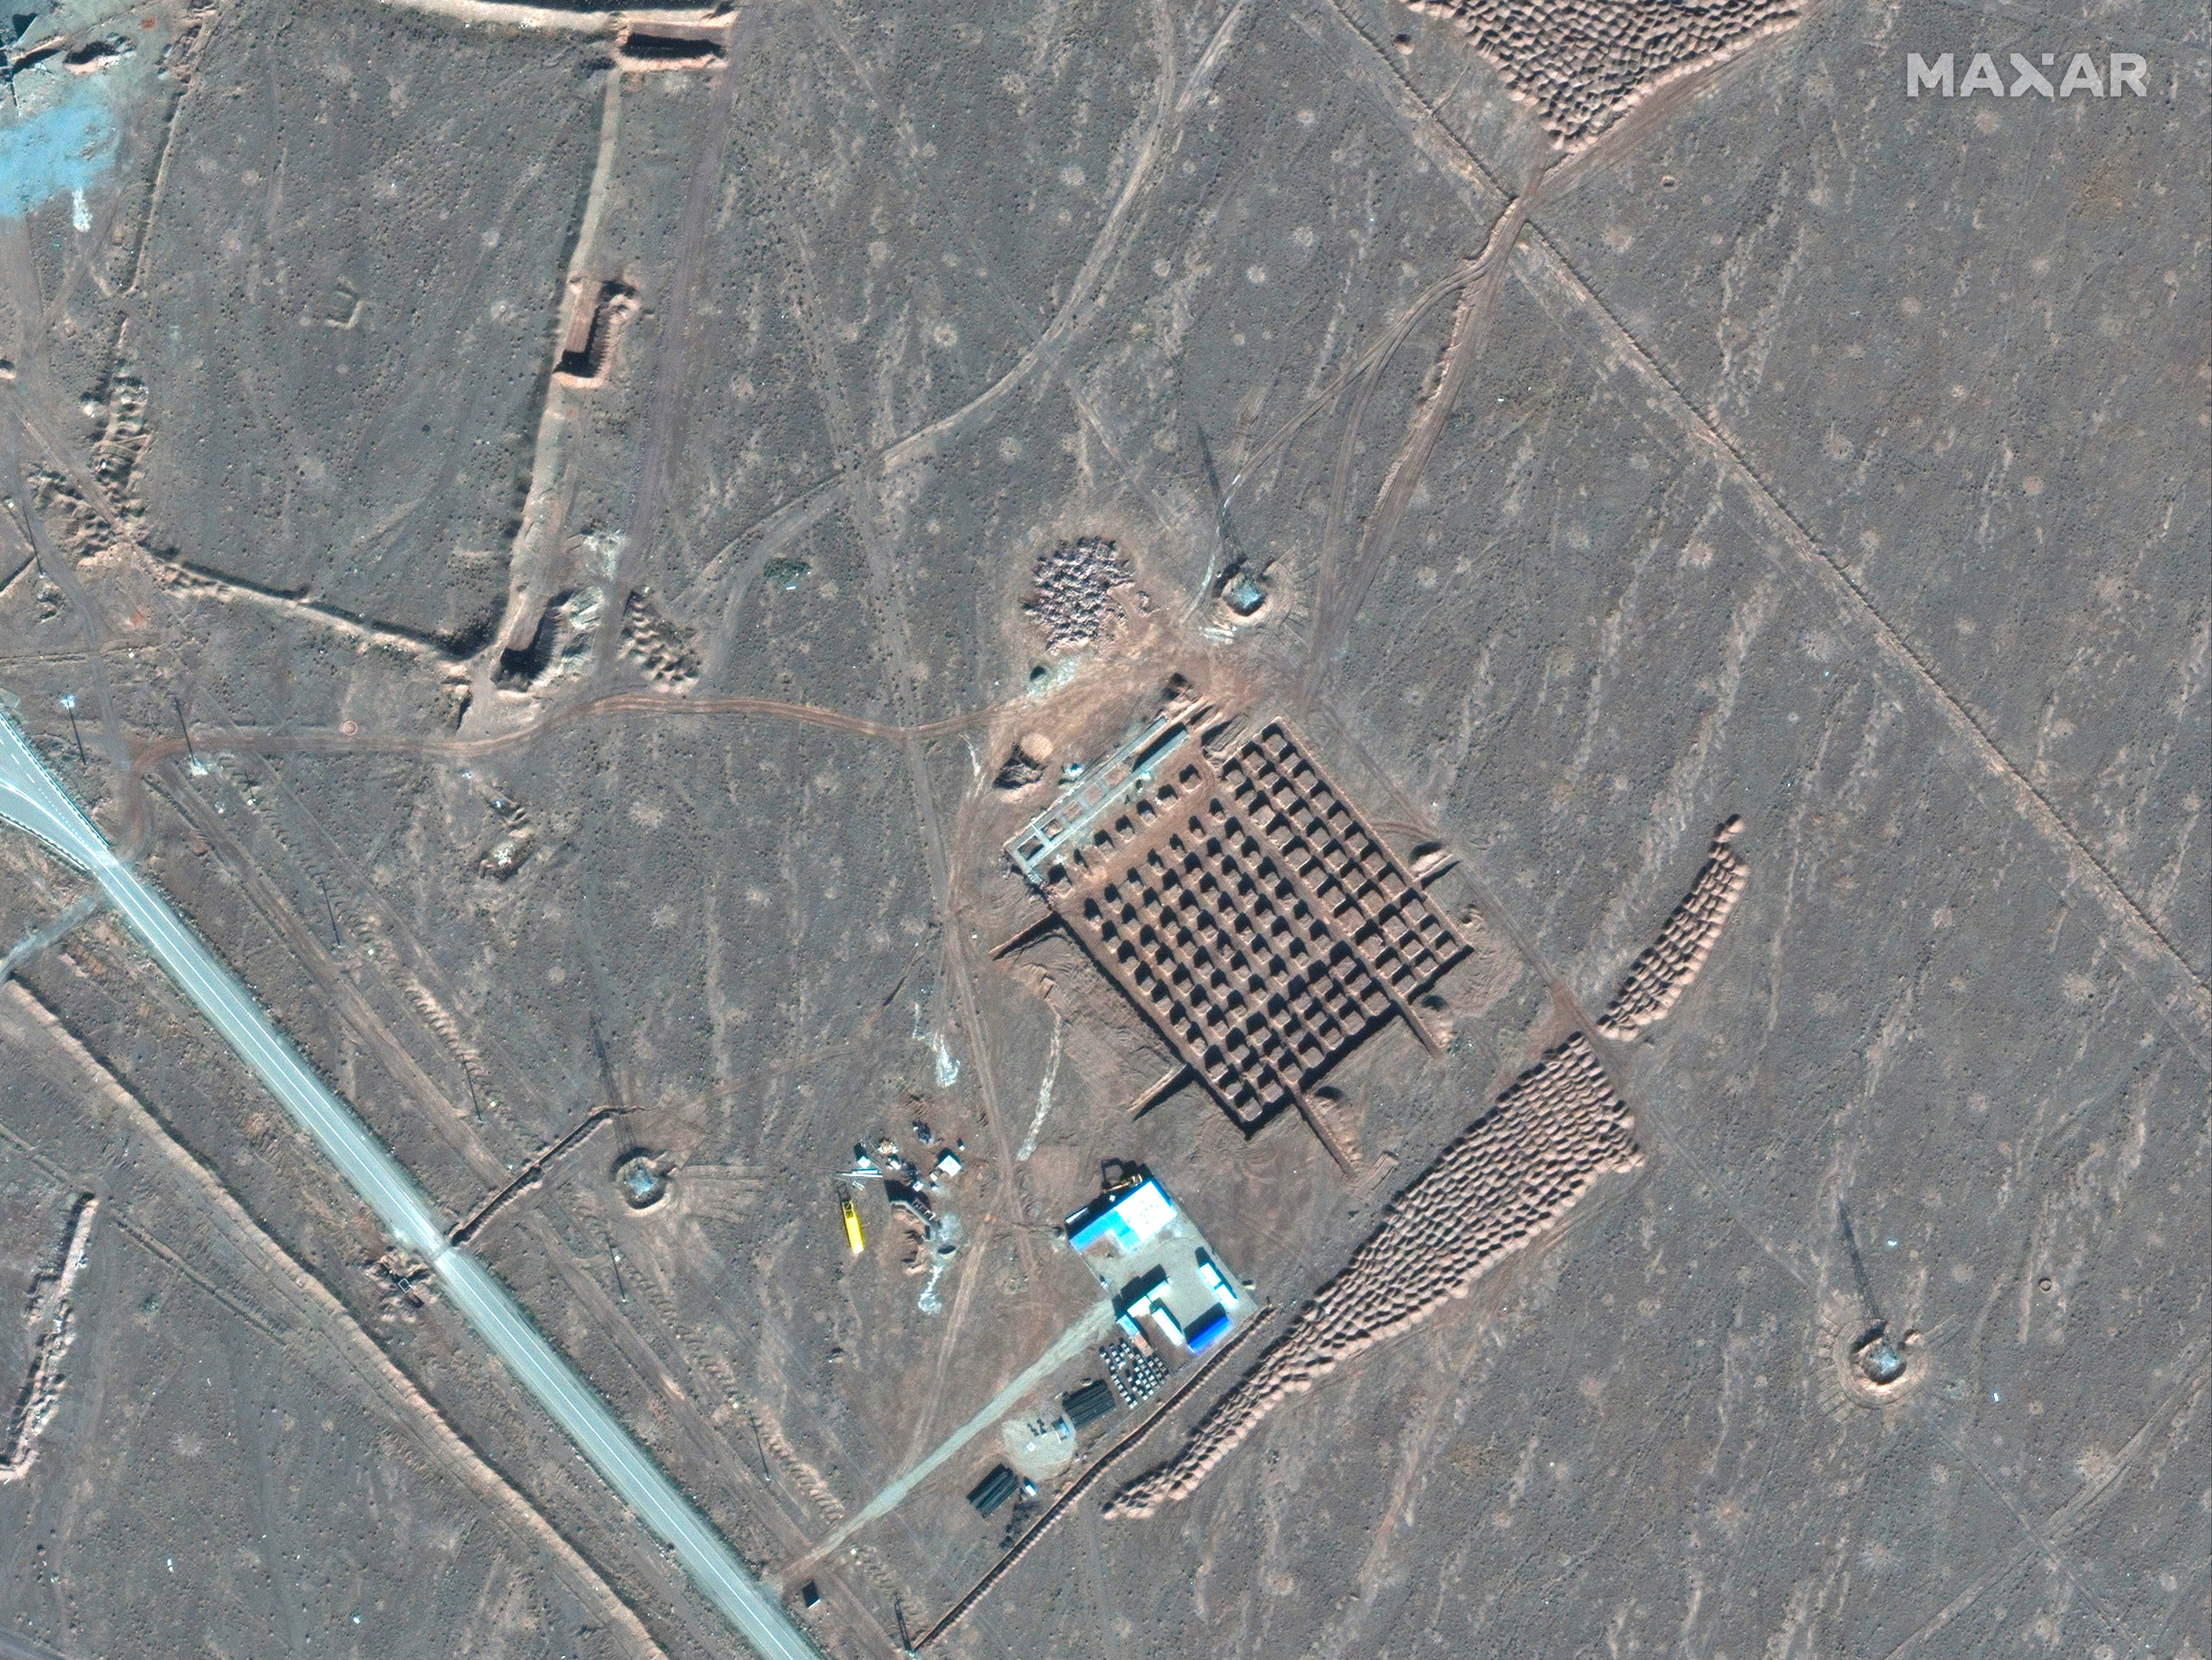 Satellite photos show construction work underway at one of Iran’s nuclear facilities